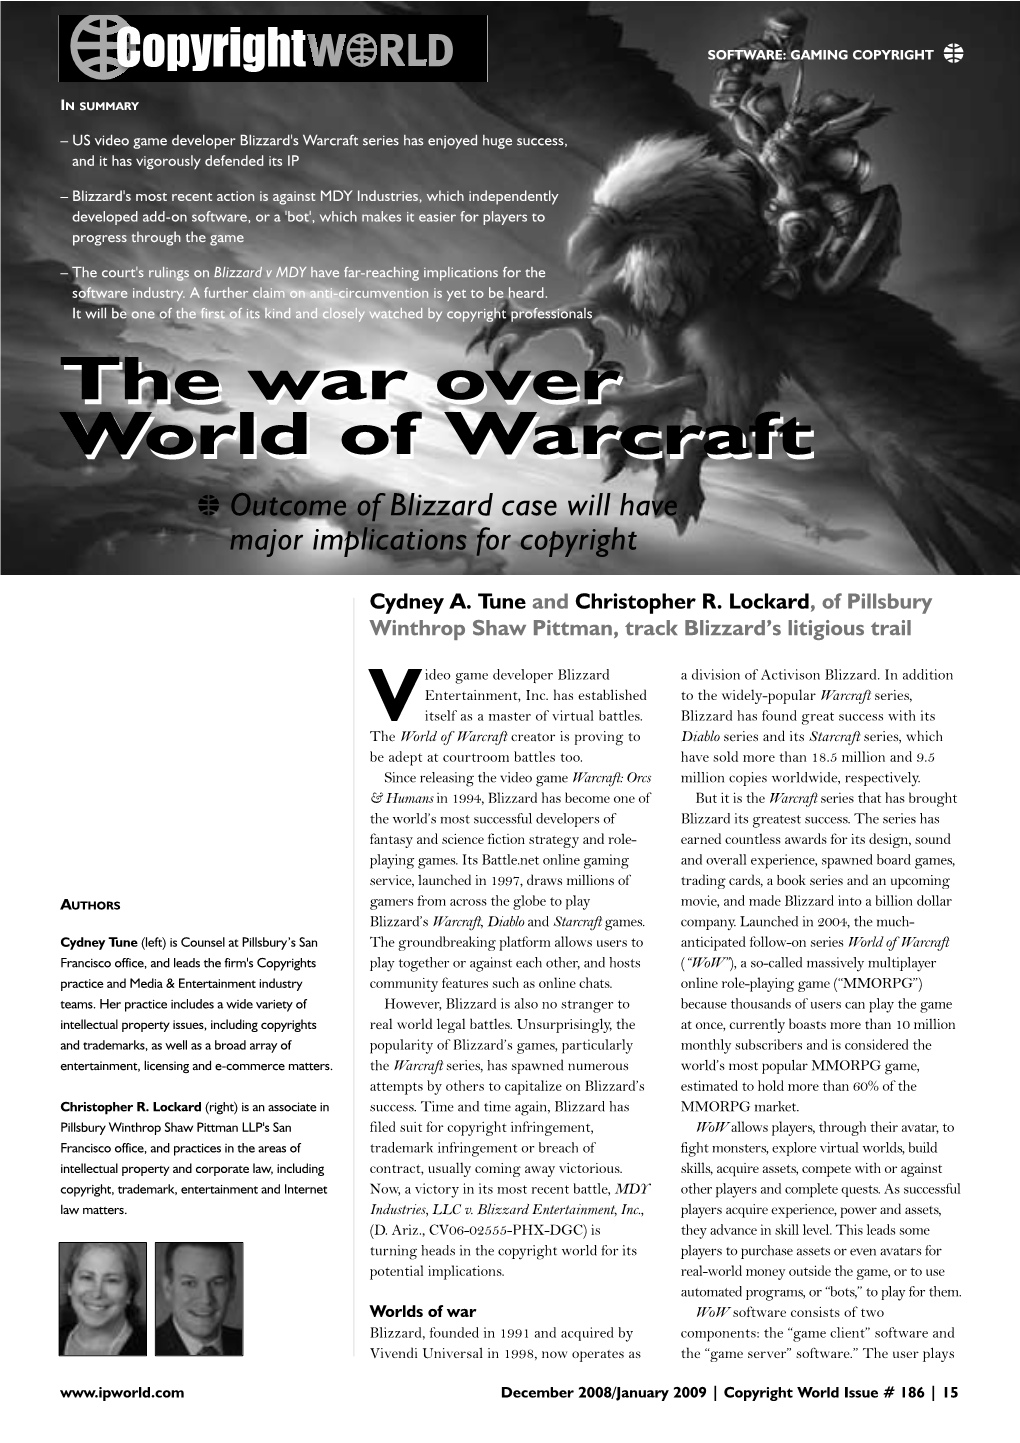 The War Over World of Warcraft The